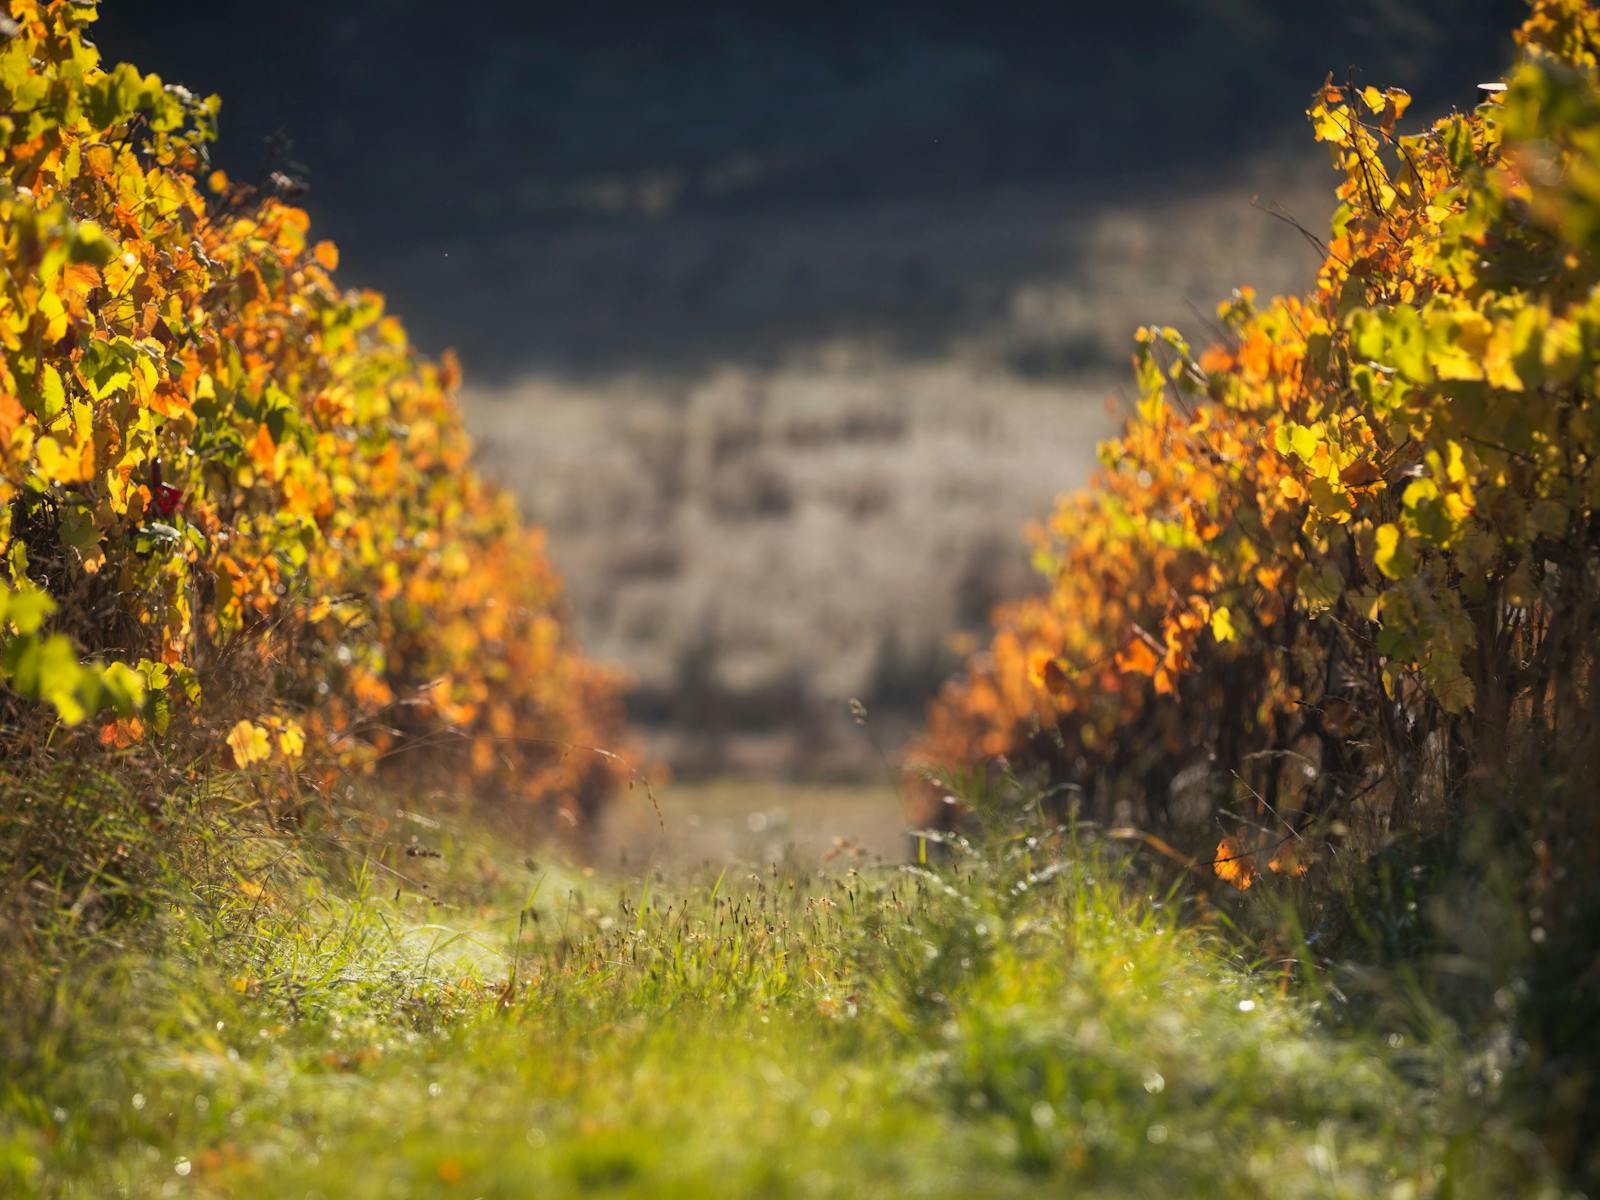 Autumn time in the vines at Priory Ridge Vineyard - nearing harvest 2018Win